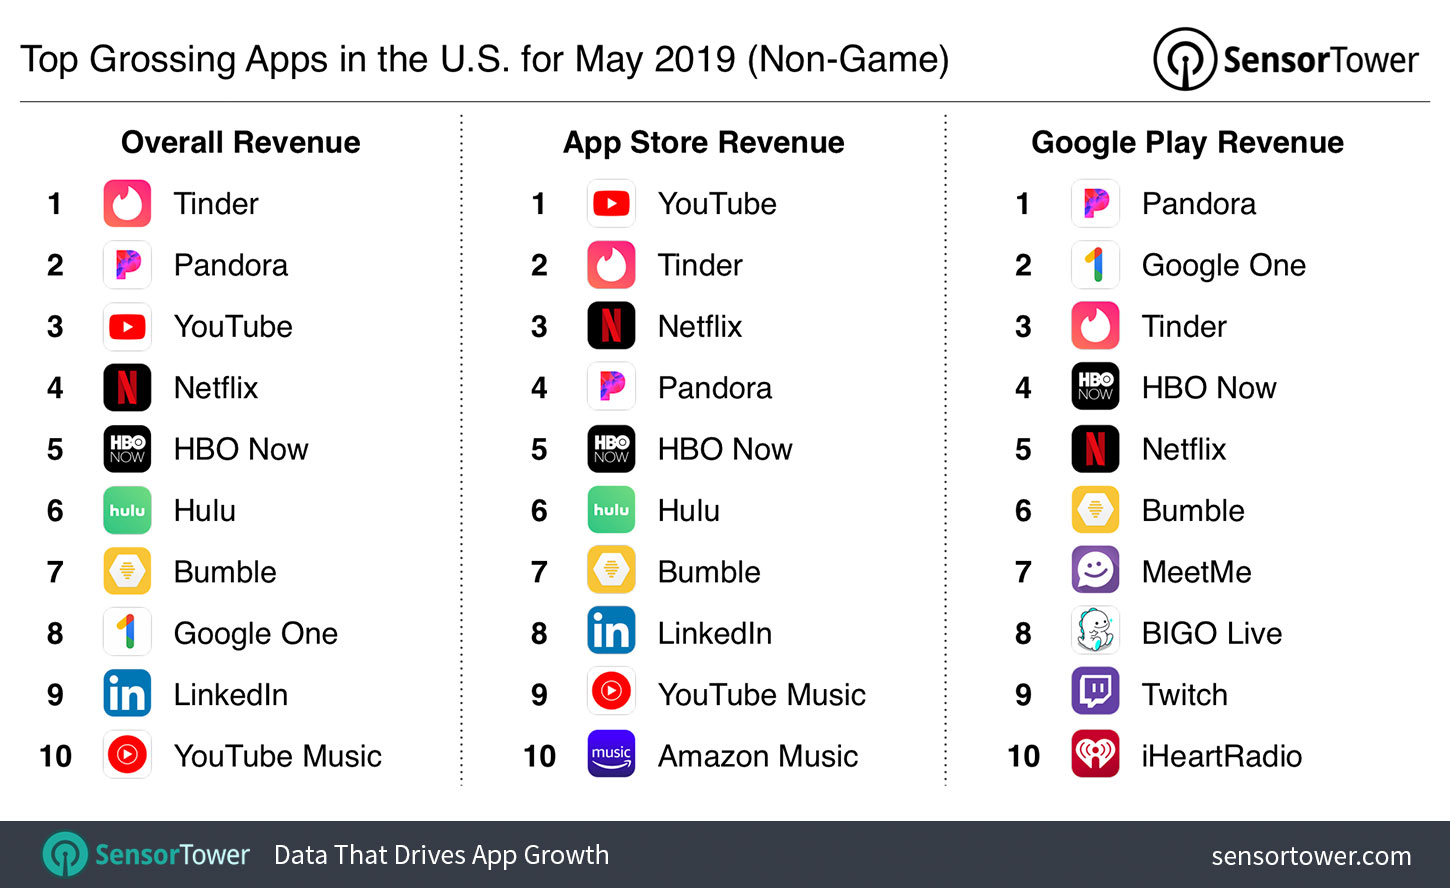 Top Grossing Apps in the U.S. for May 2019